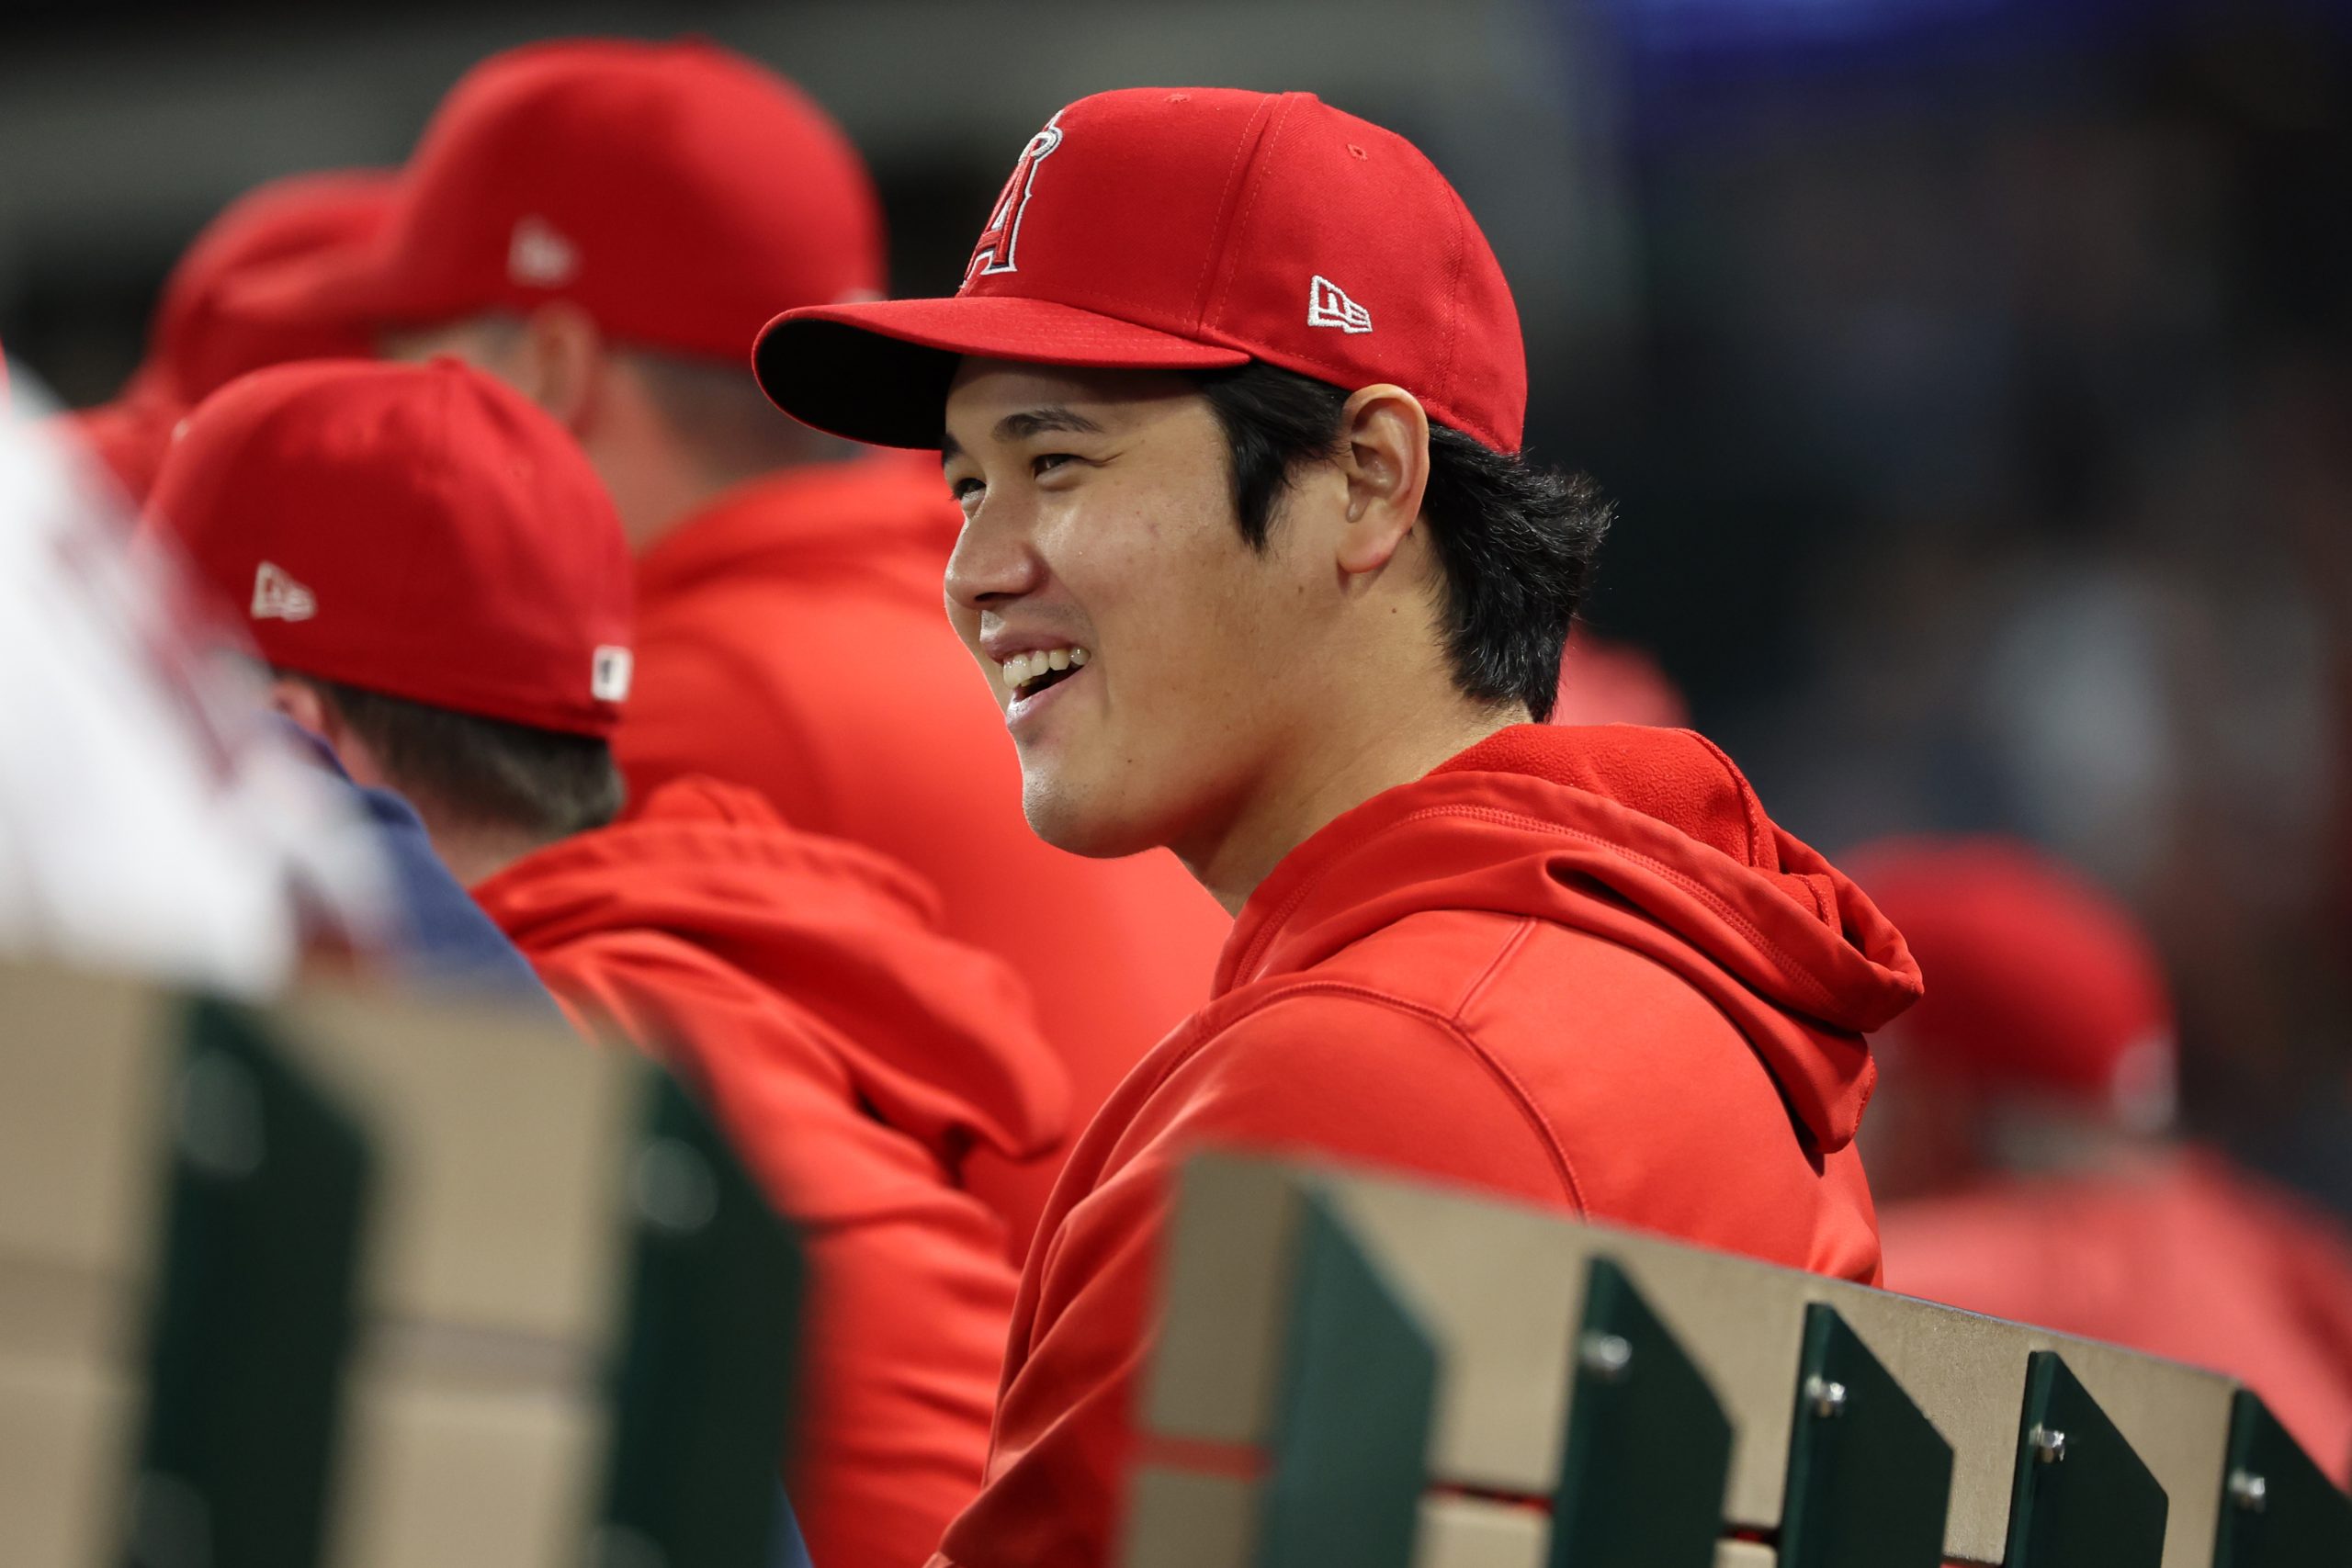 Shohei Ohtani Found A New Way To Shine As A Two-Way All Star